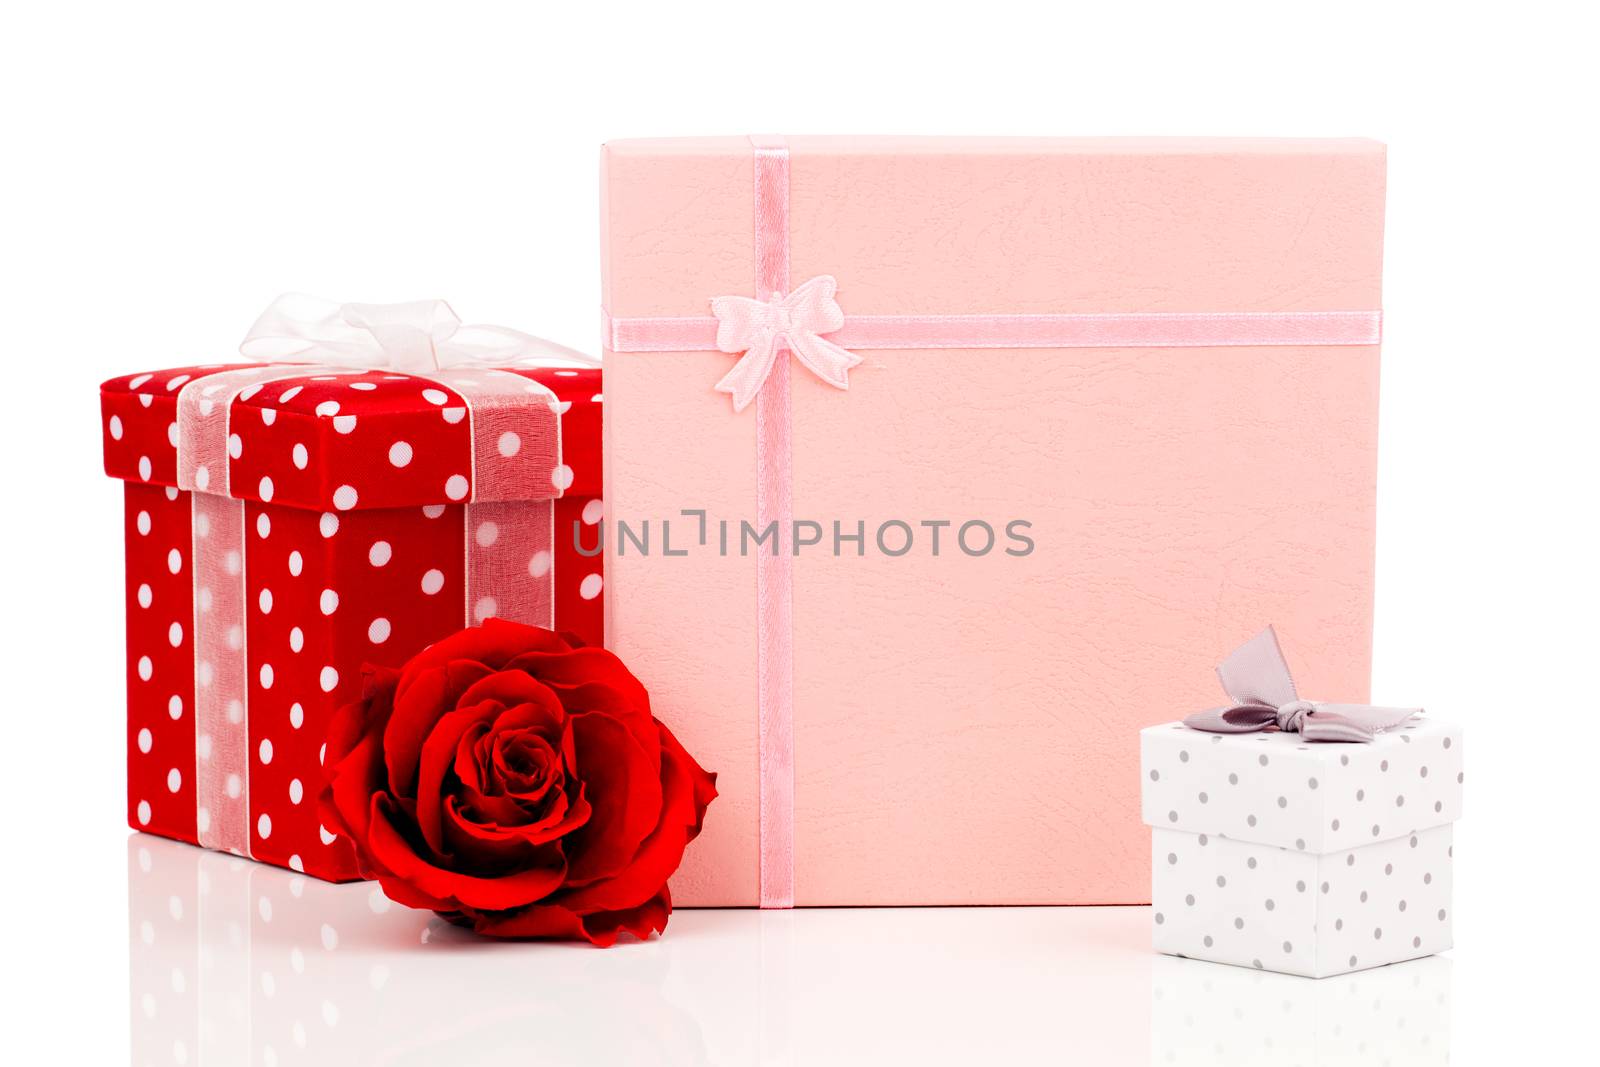 color gift boxes on white background